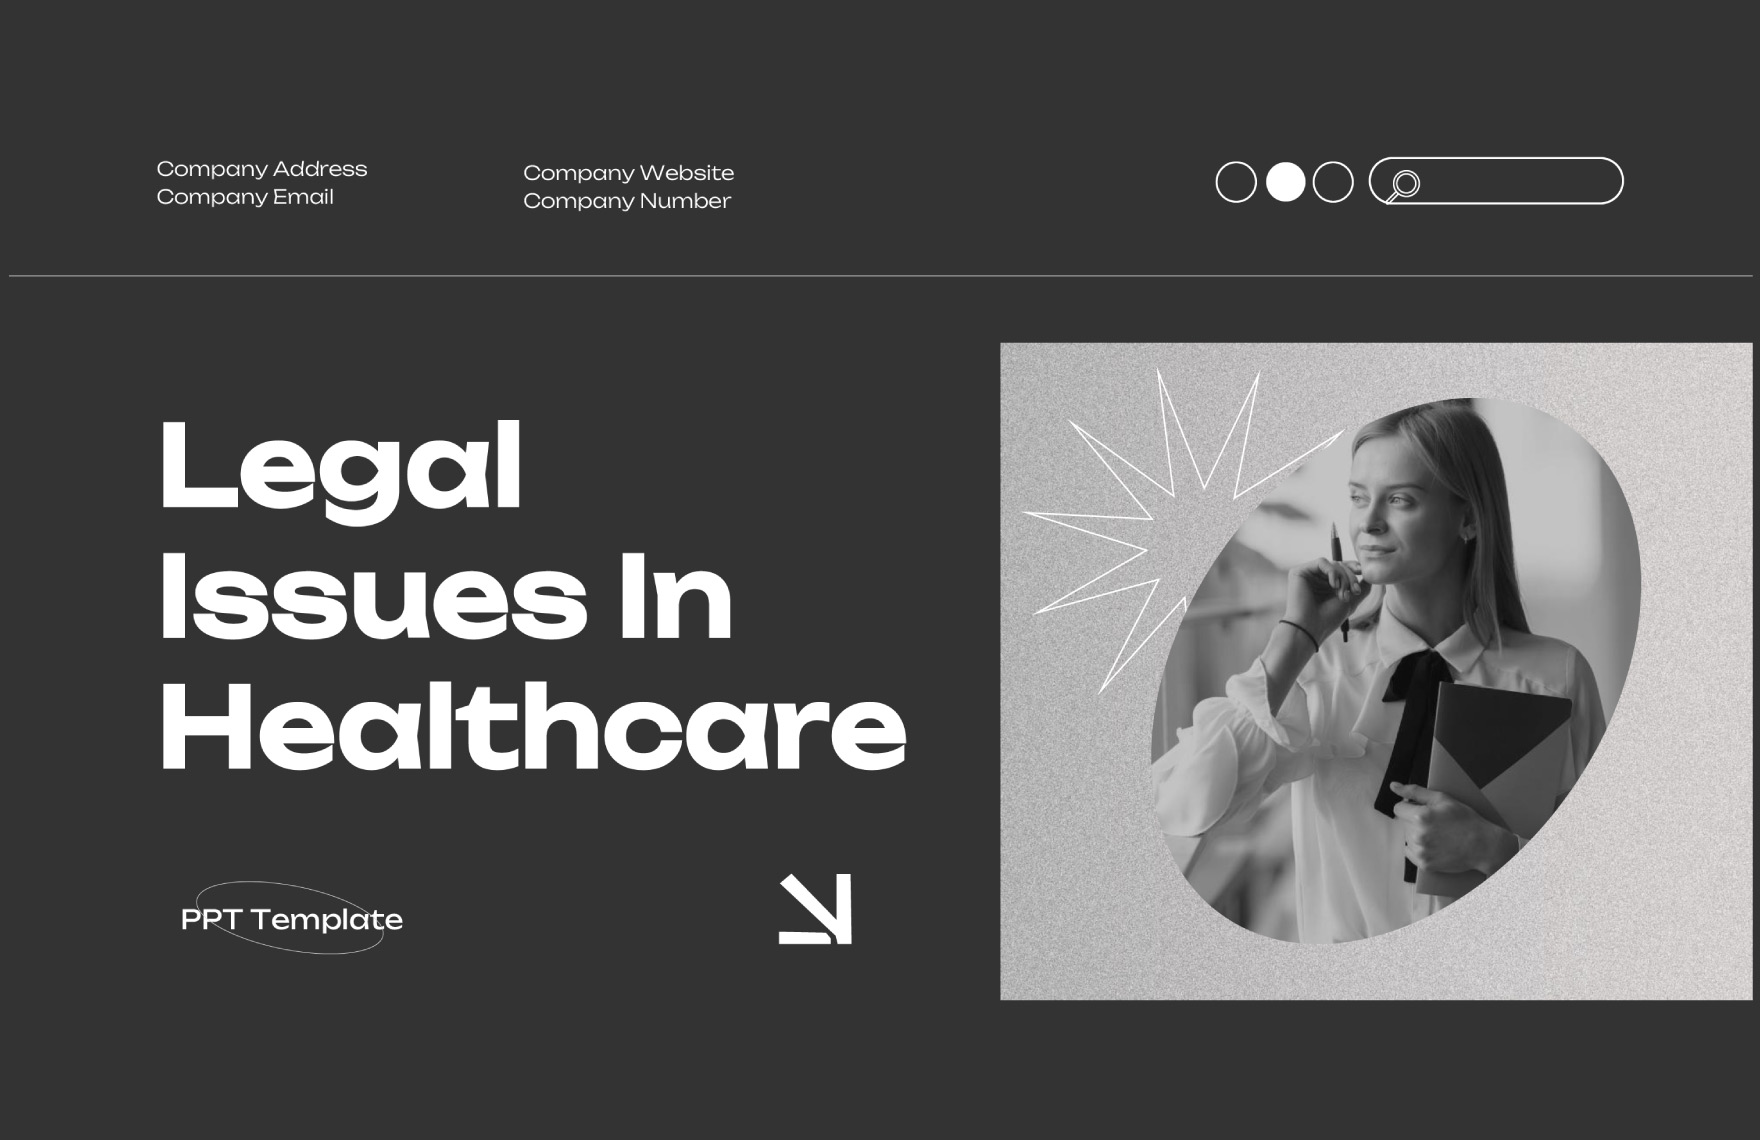 Legal Issues in Healthcare PPT Template